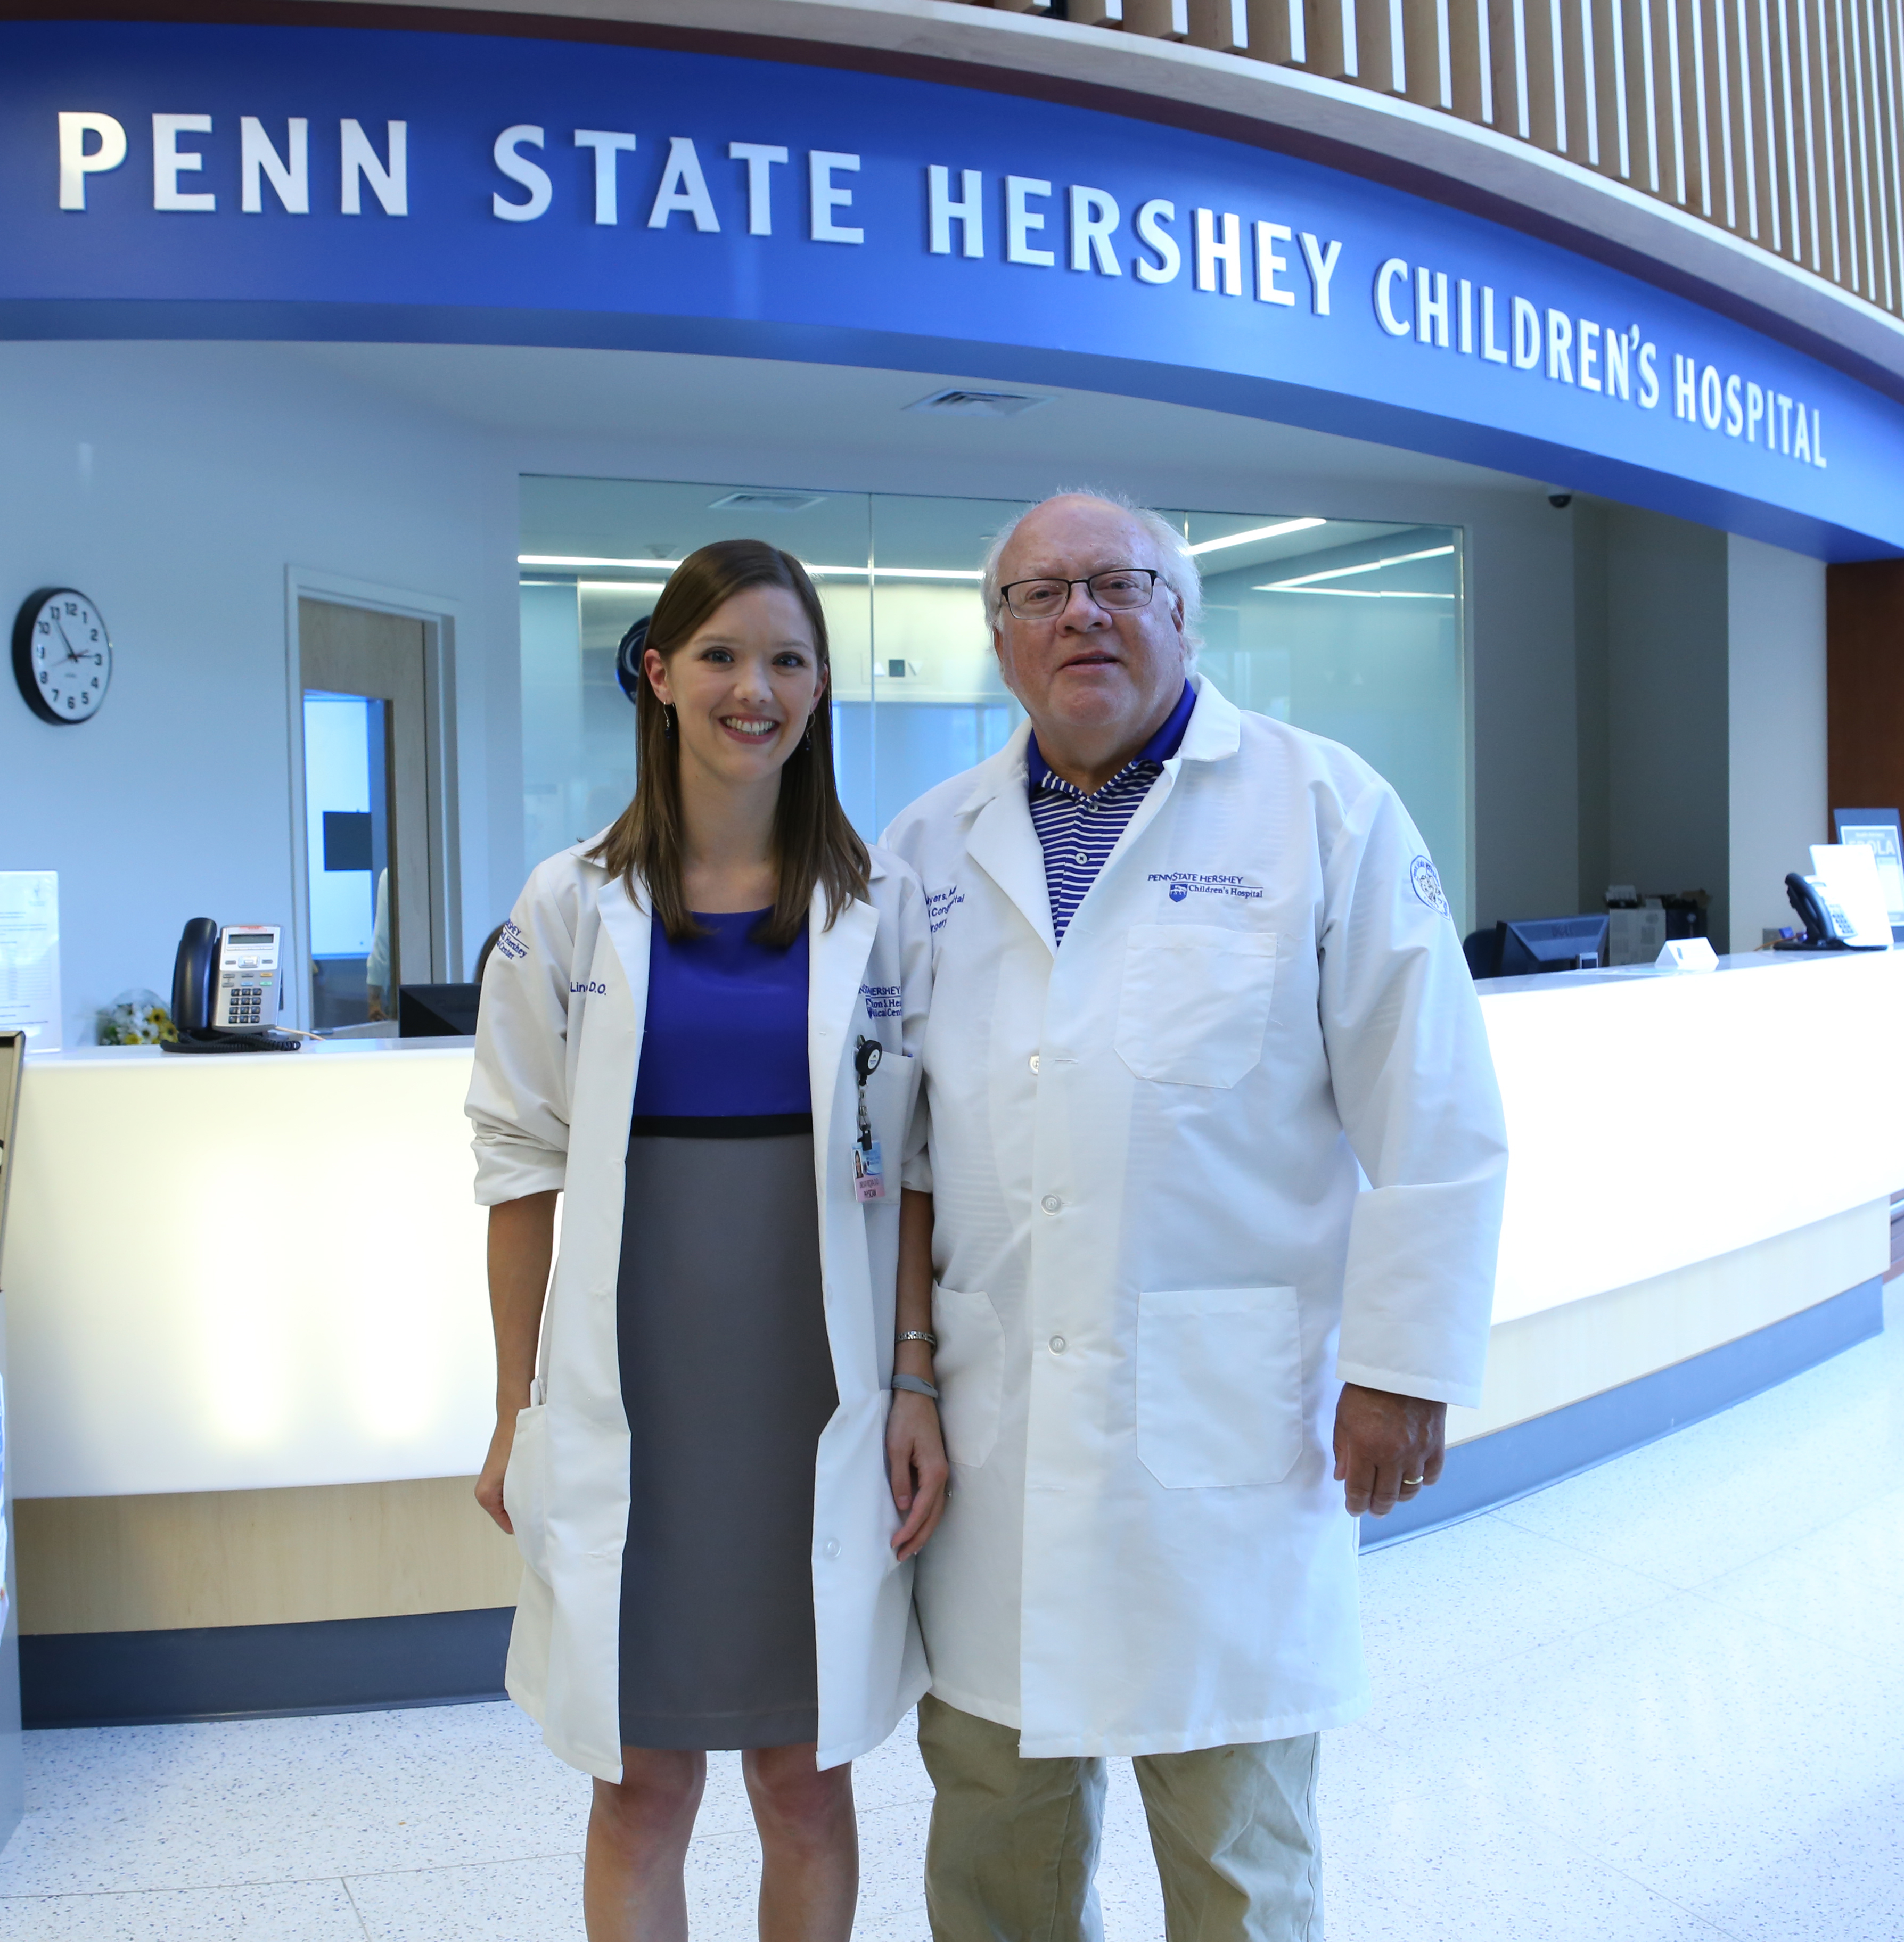 Lindsay Requa and Dr. Myers